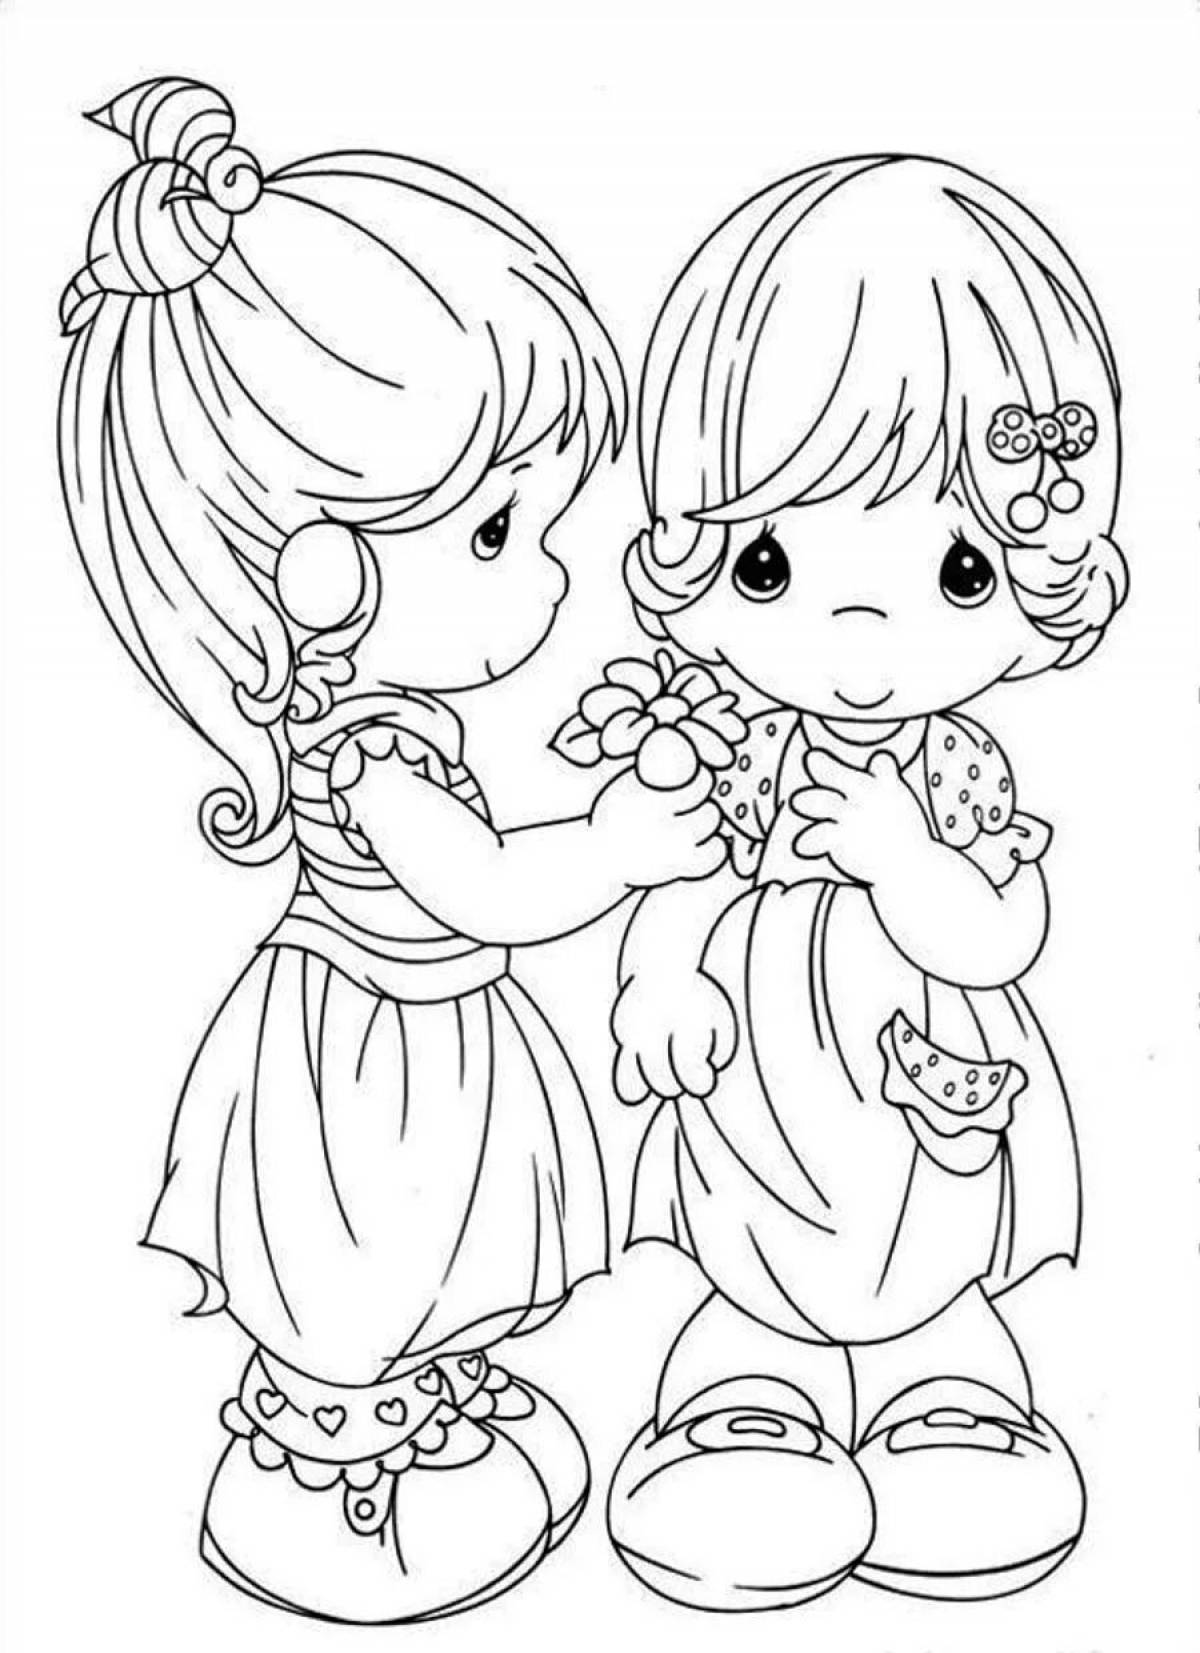 Two sisters holiday coloring book